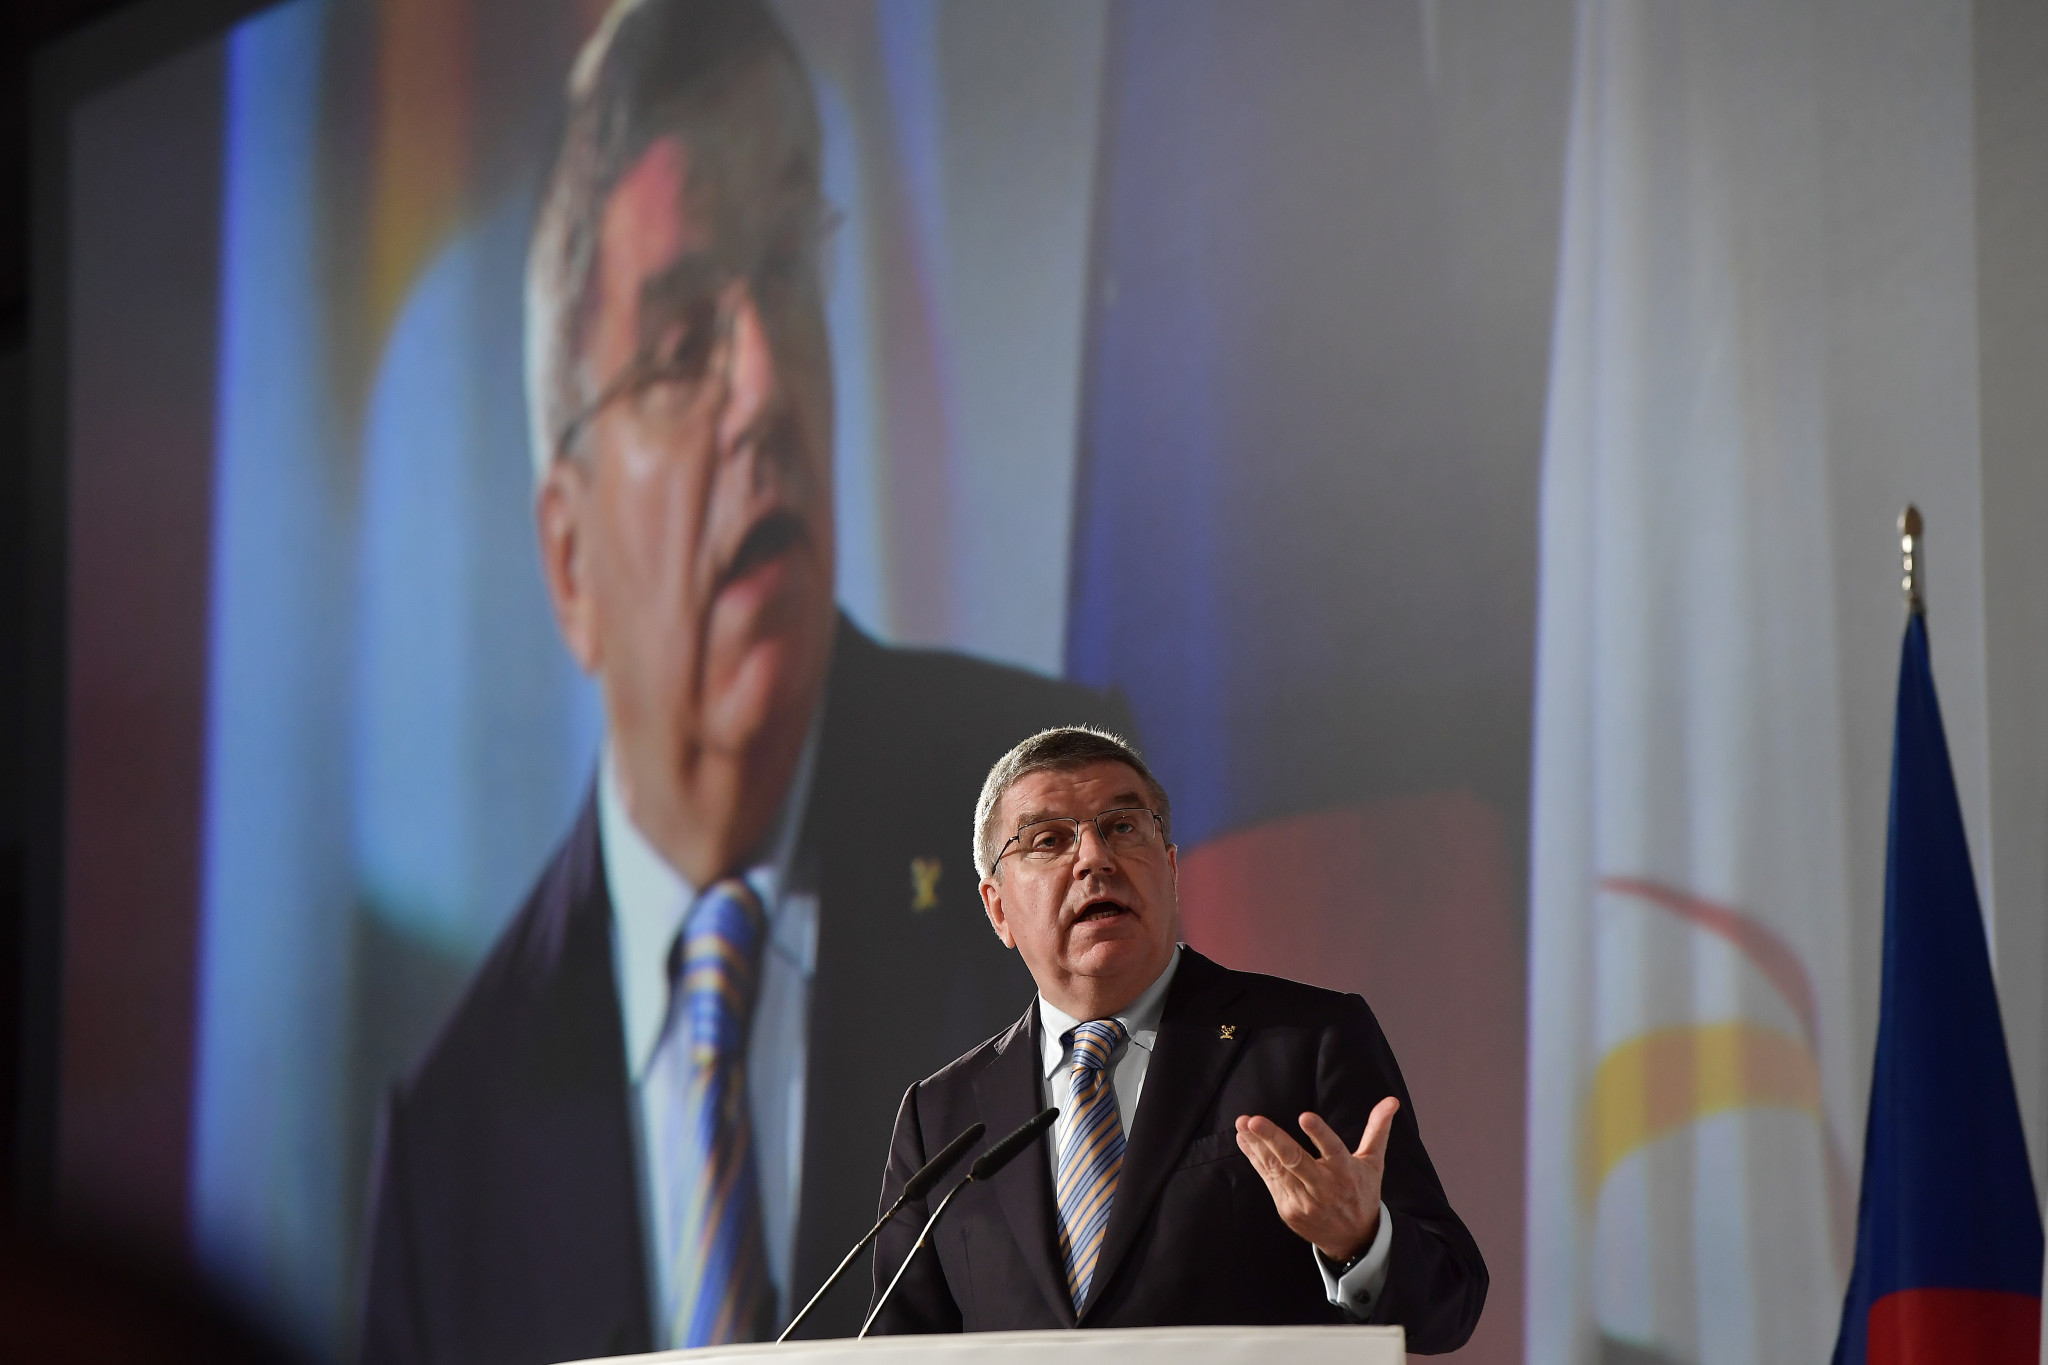 IOC President Thomas Bach pictured delivering a keynote address ©Getty Images